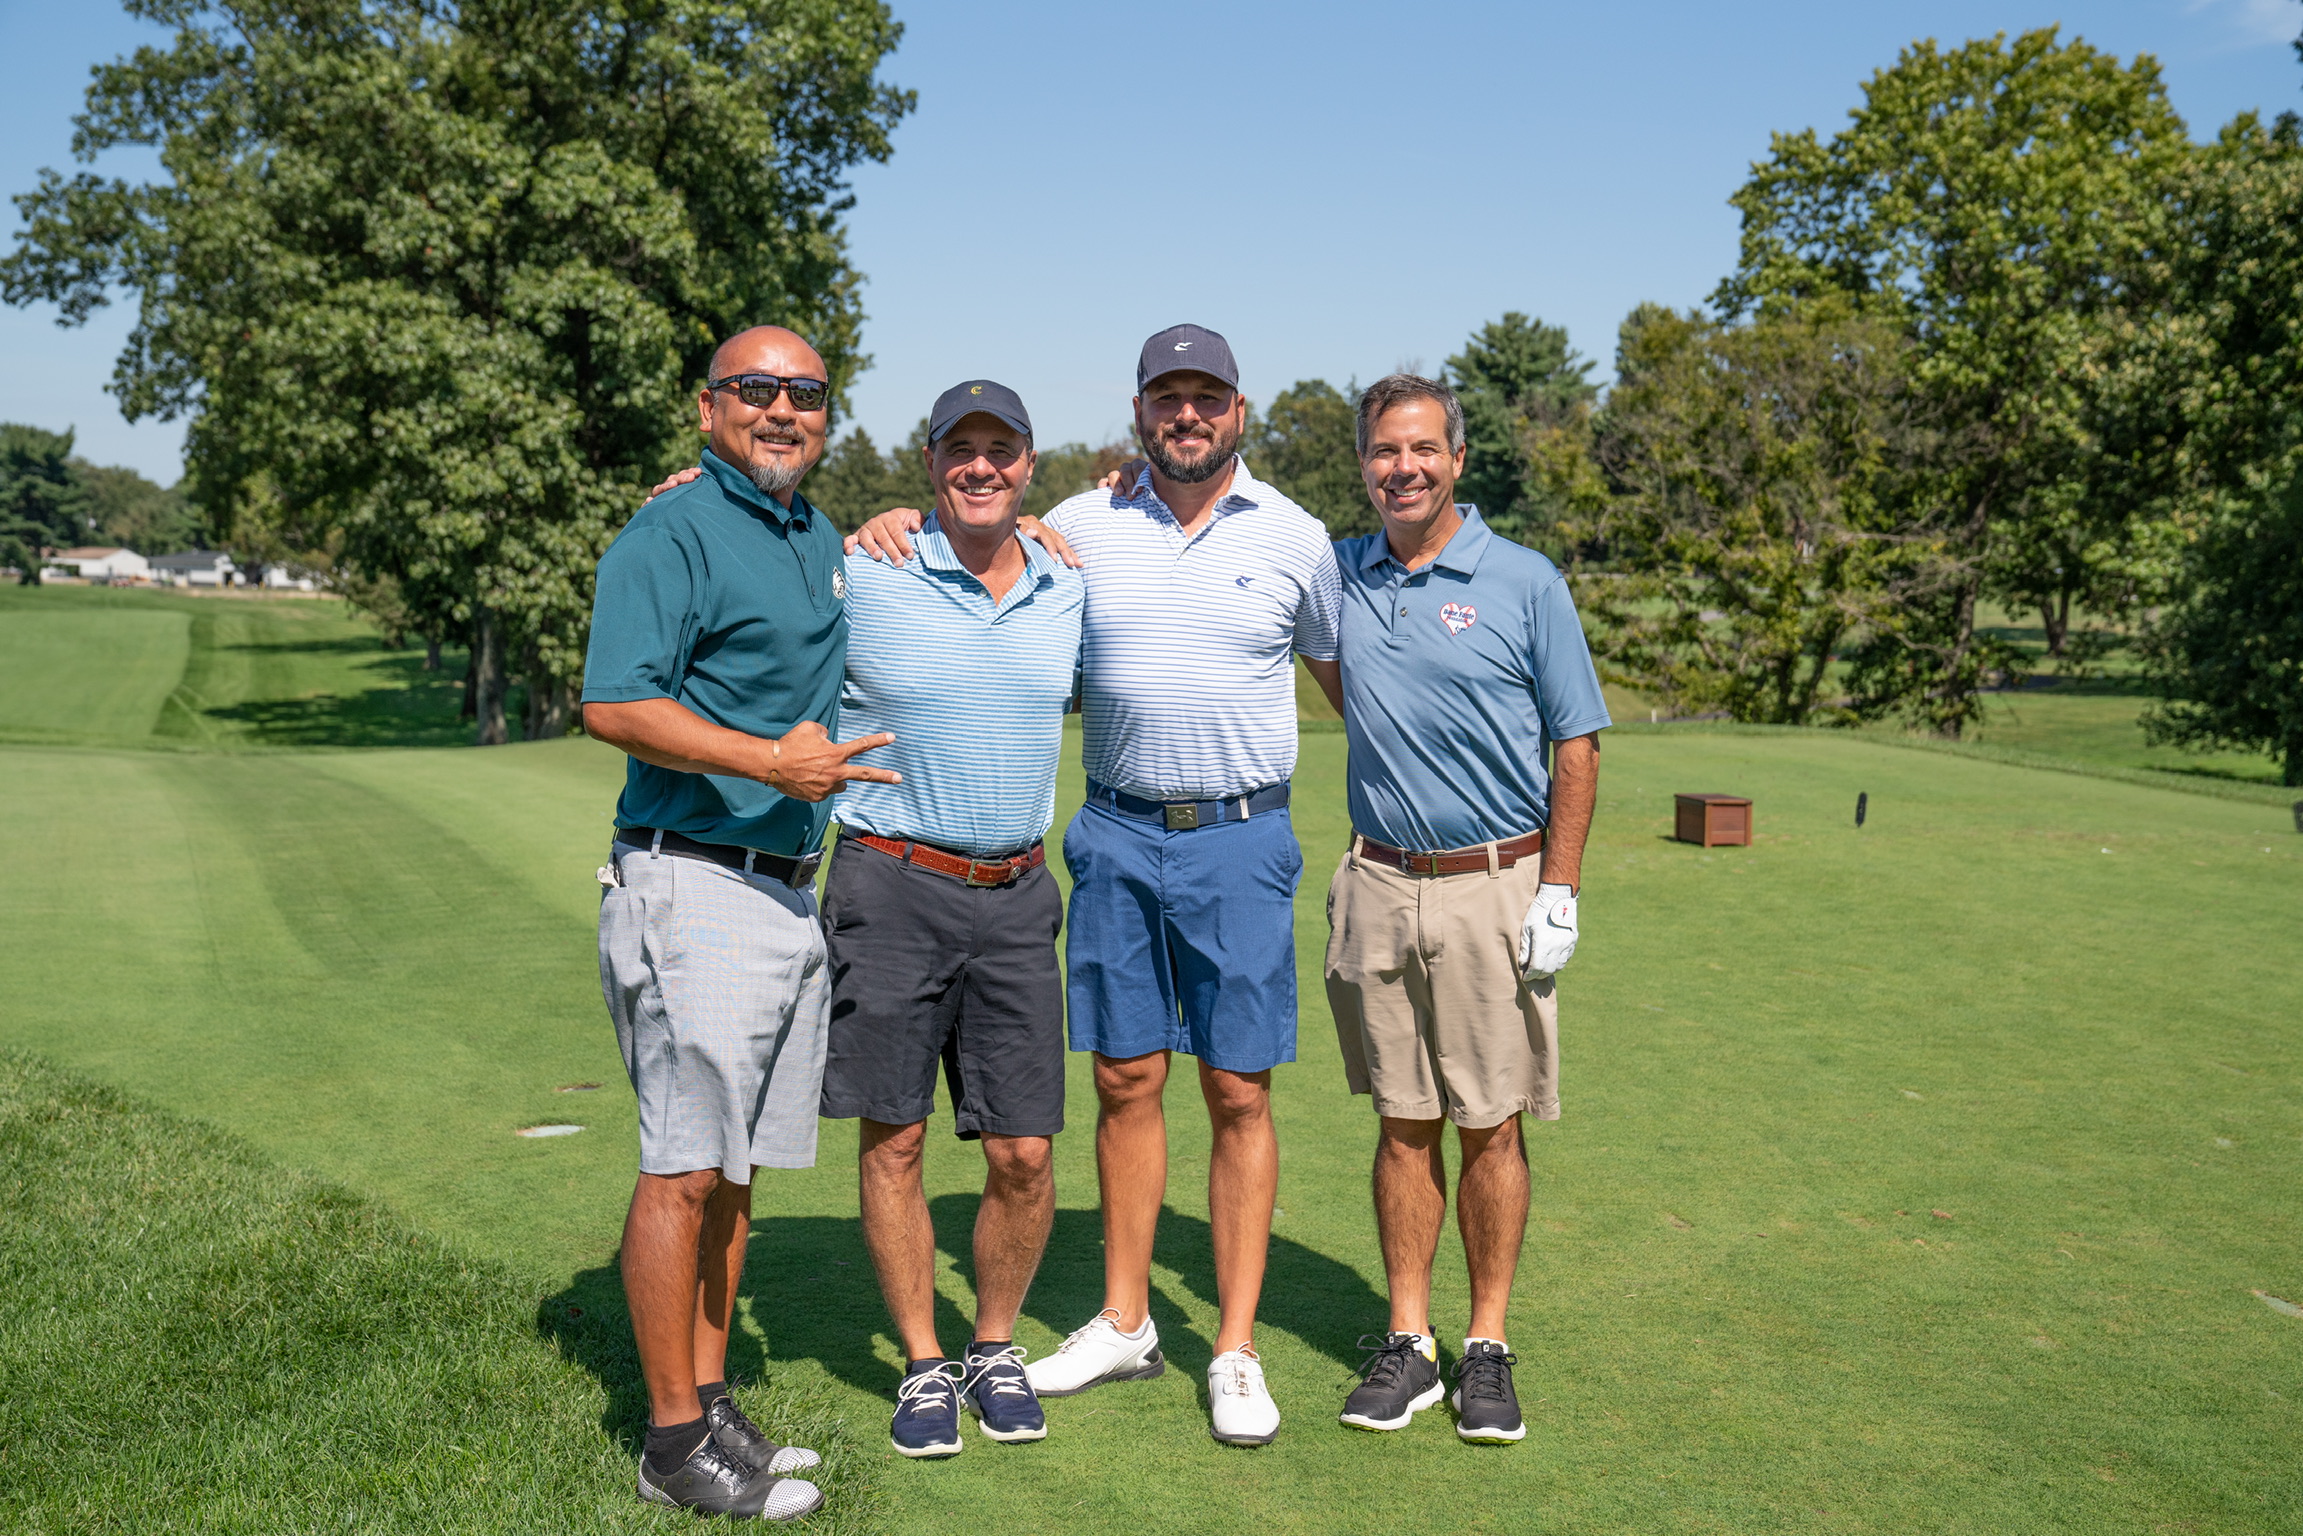 2021 Golf Outing Group Photo